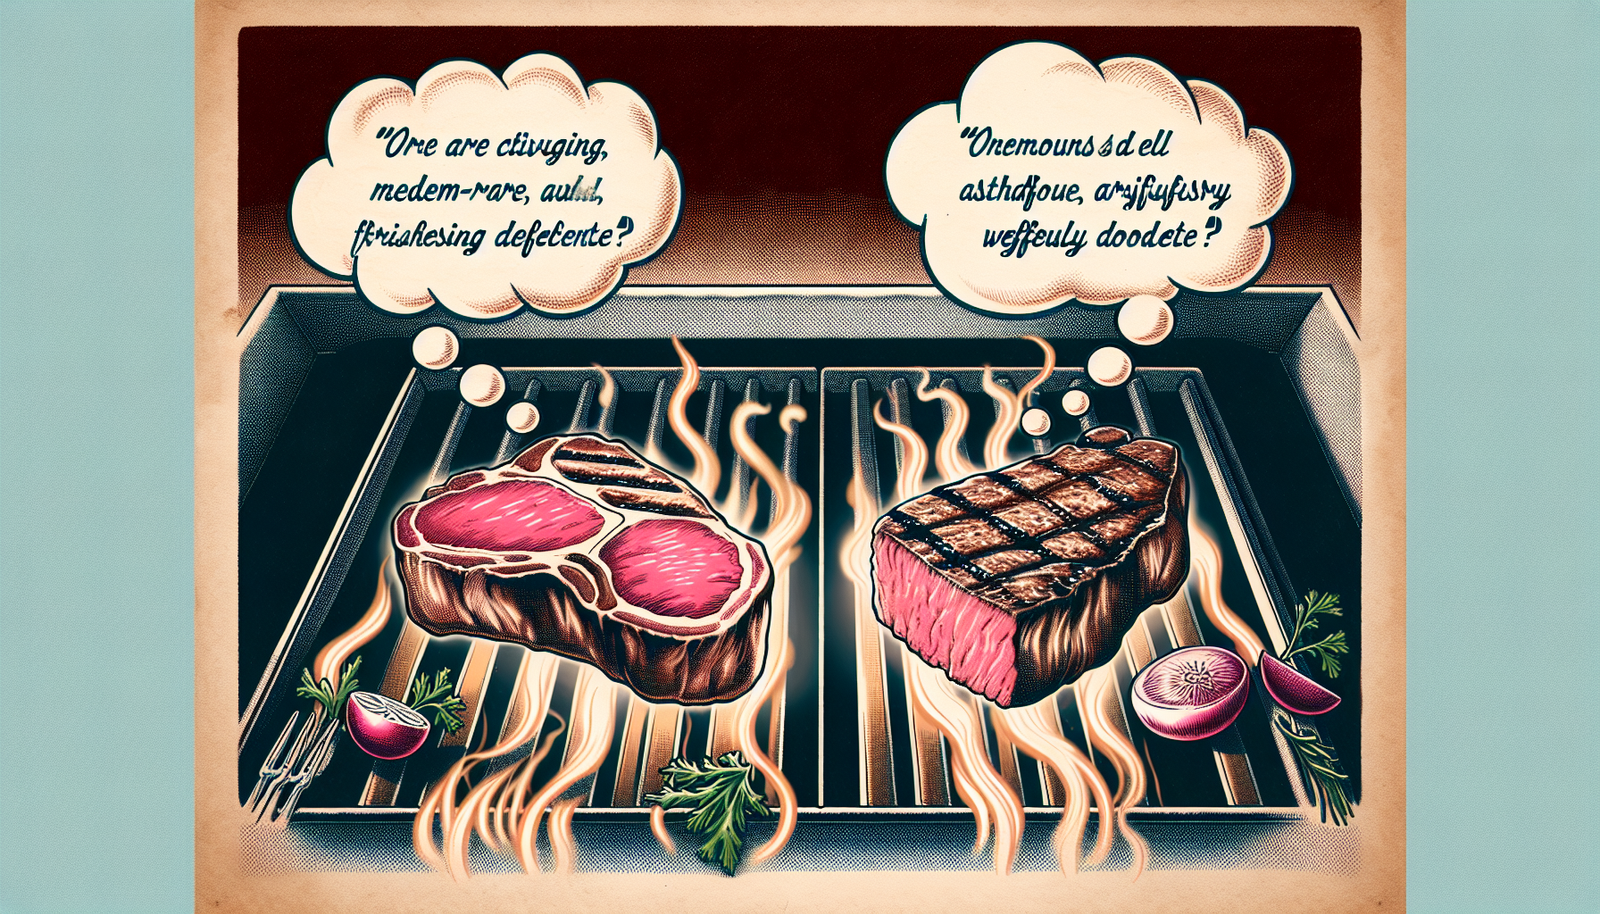 Which Is Healthier Medium-rare Or Well-done?